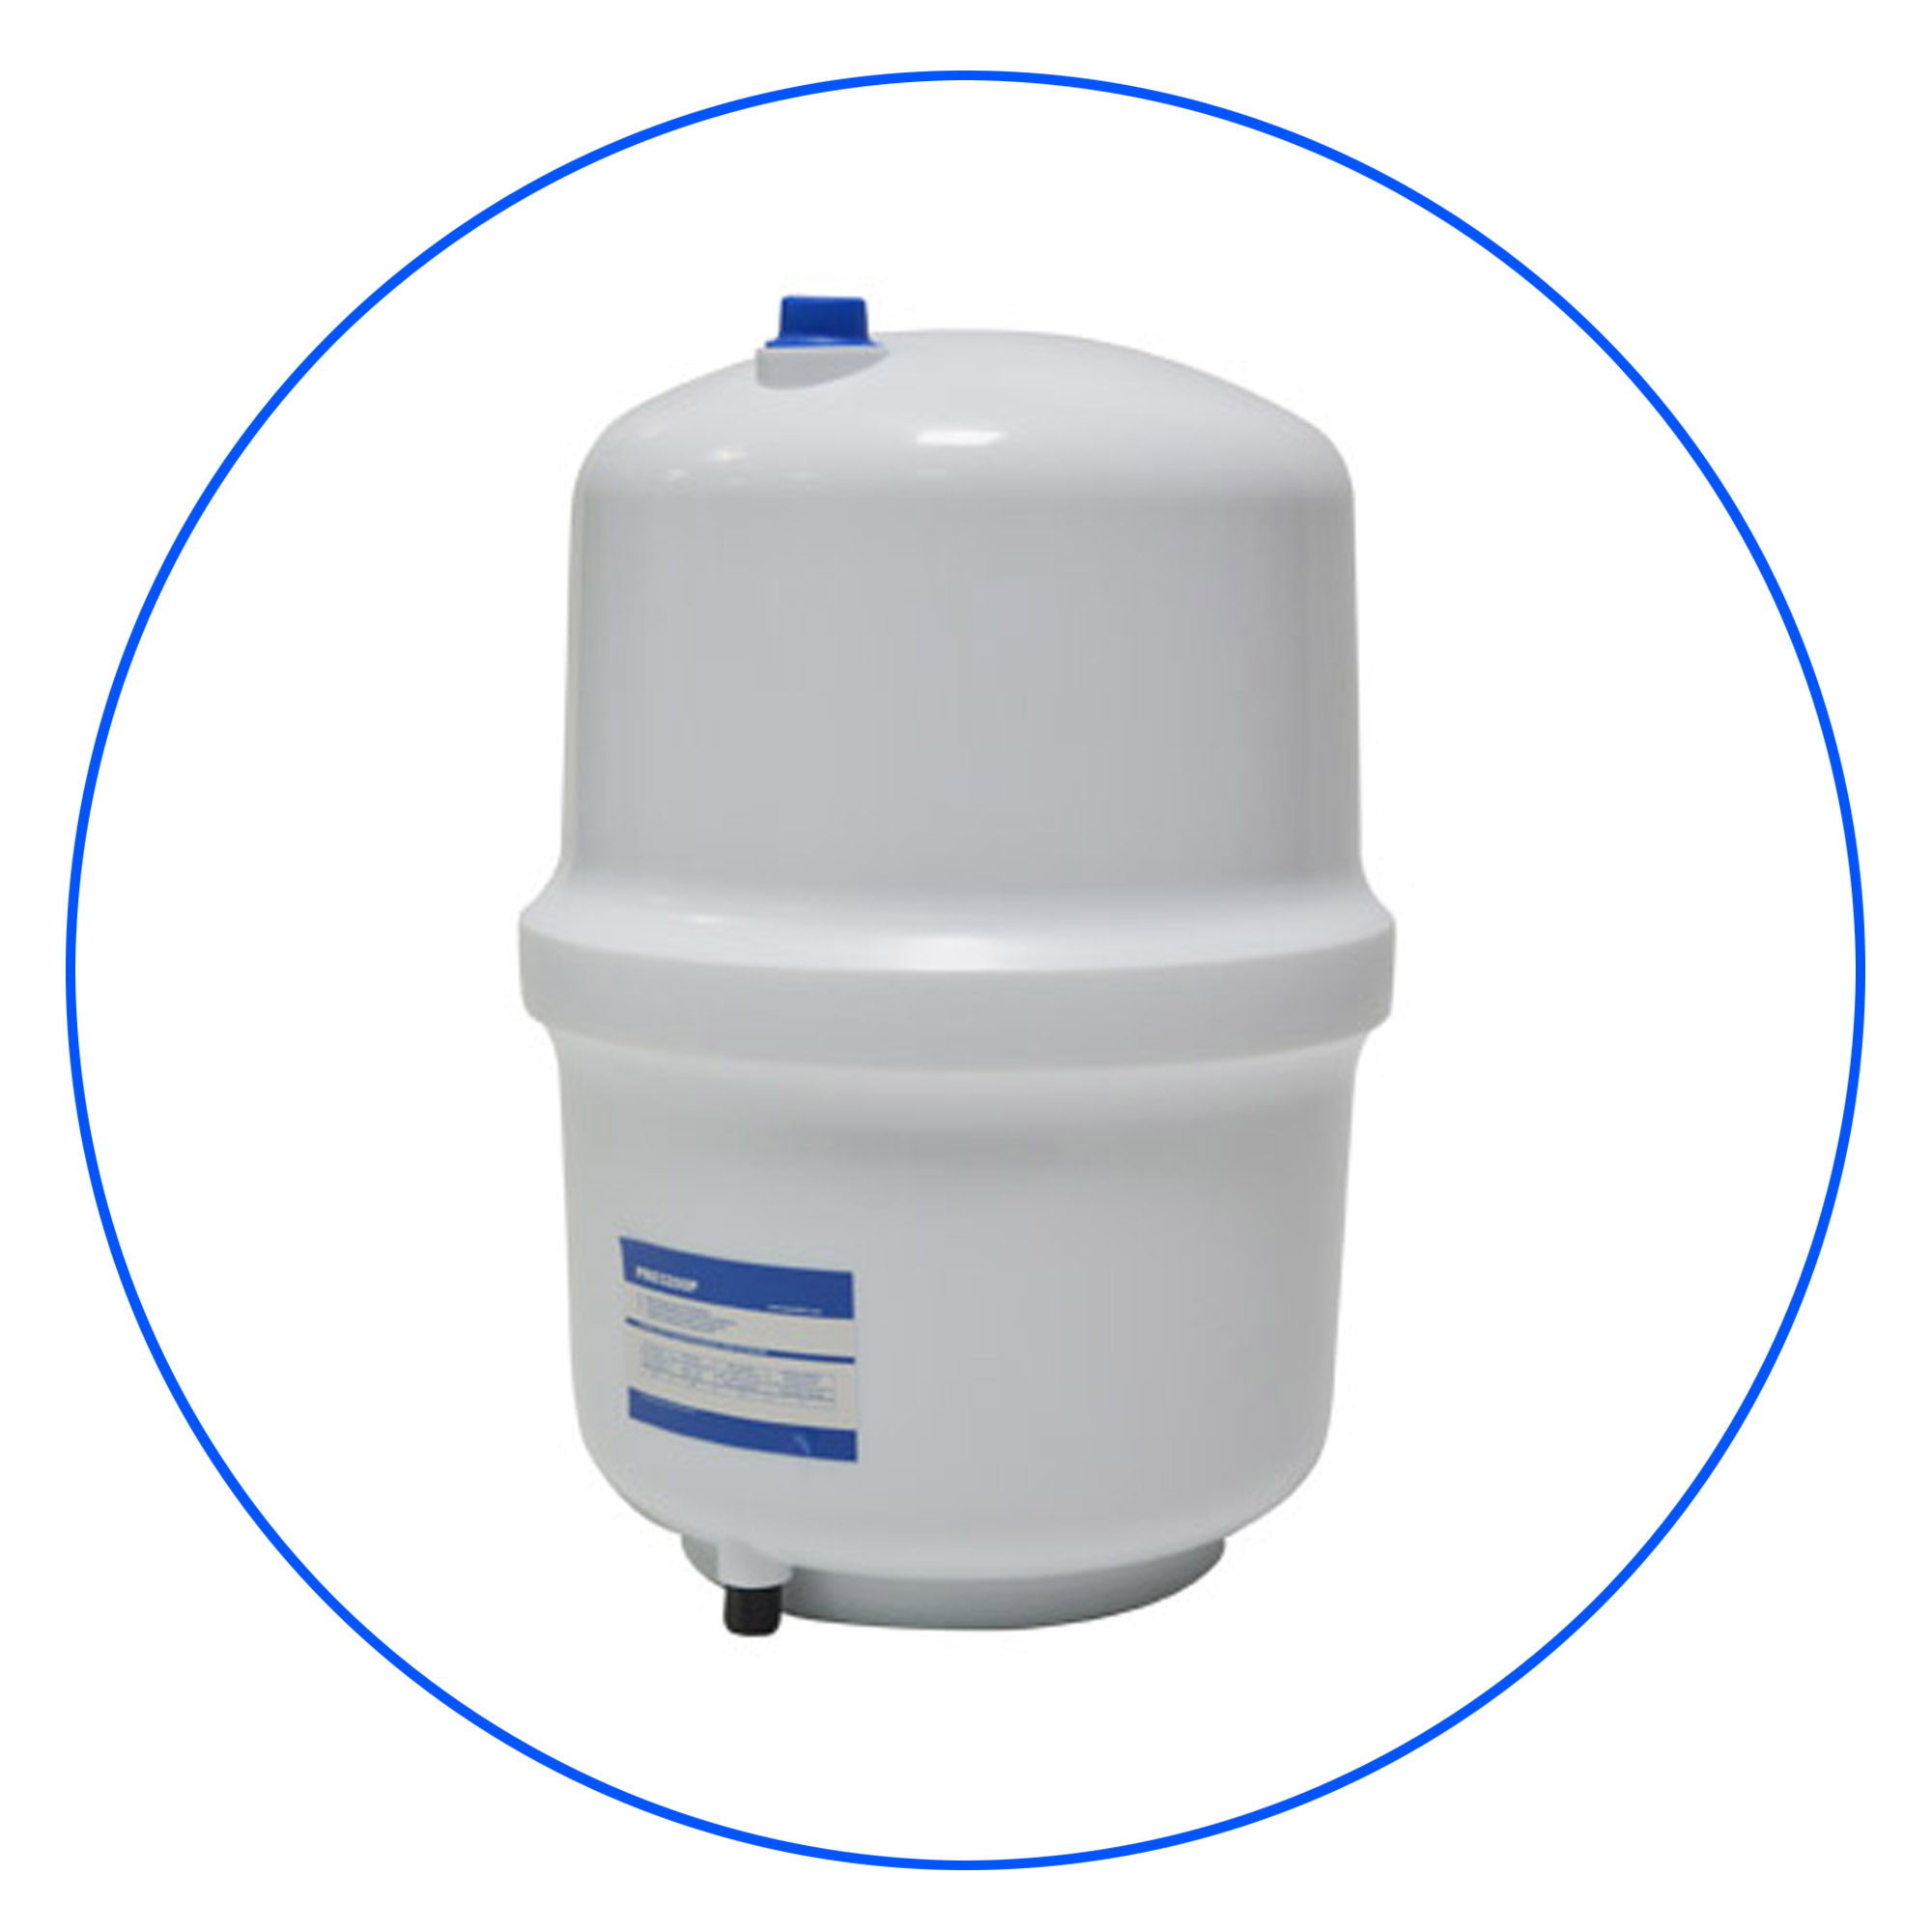 iSpring T32M 3.2 Gallon Pressurized Storage Tank for Reverse Osmosis (RO) Systems The Home